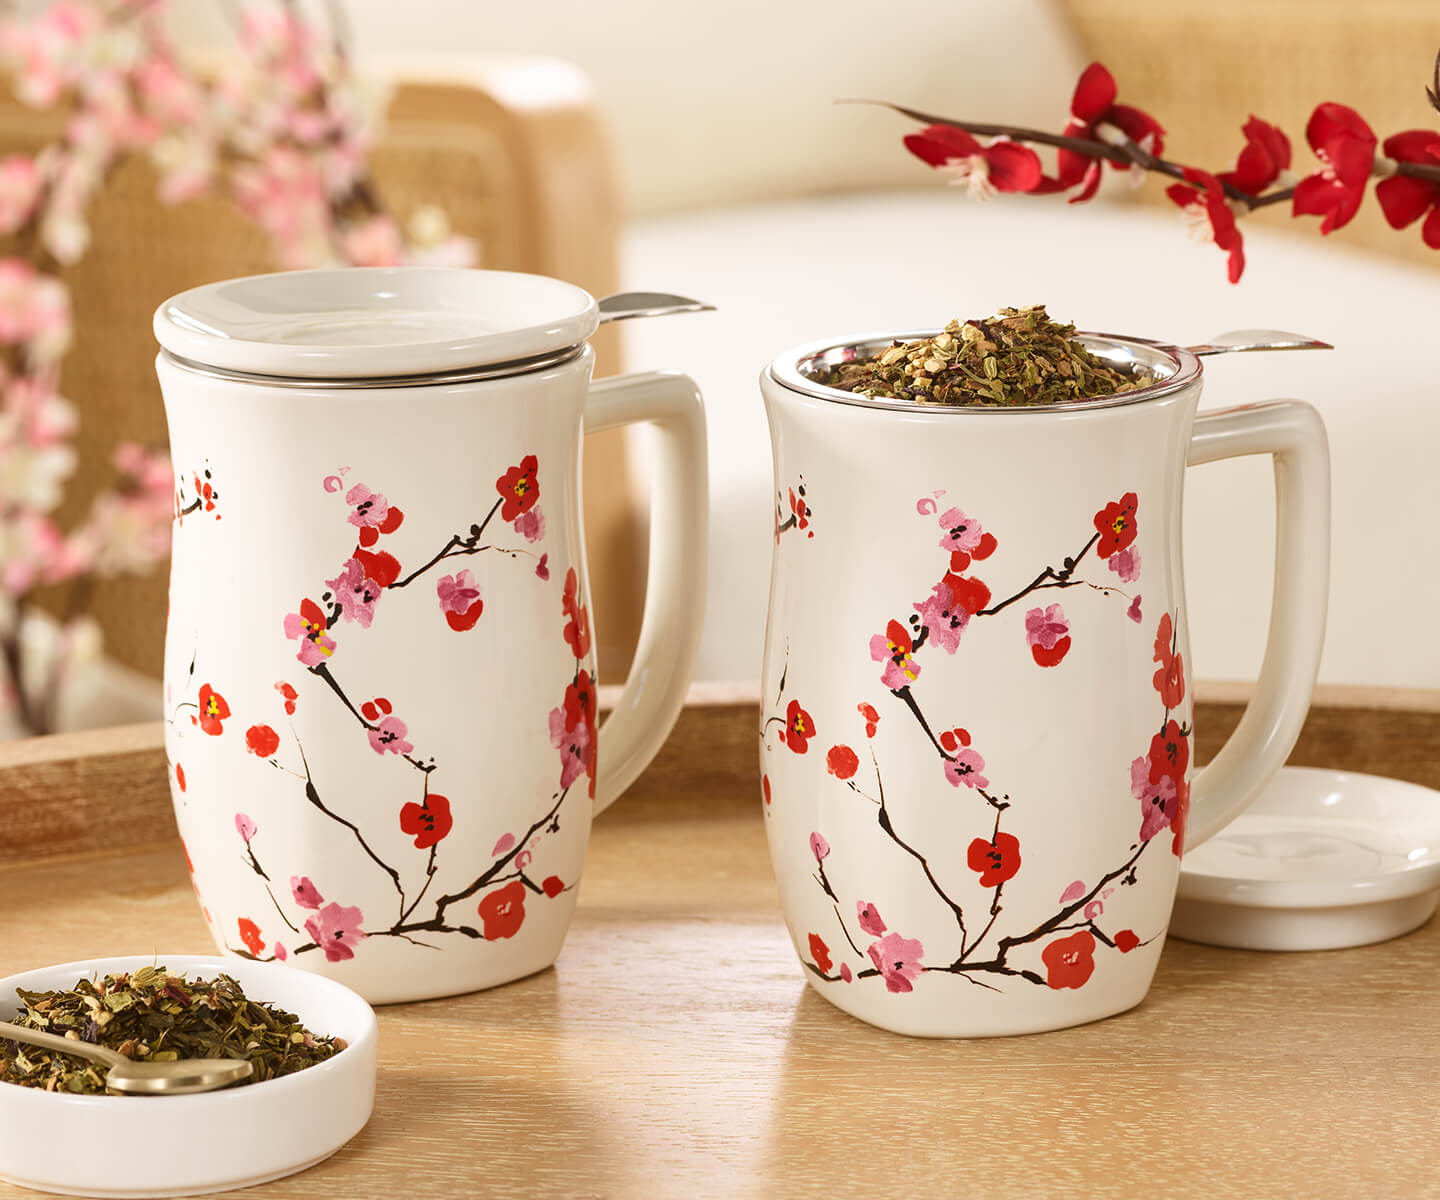 Two Fiore Sakura Steeping Cups & Infuser, one with tea inside